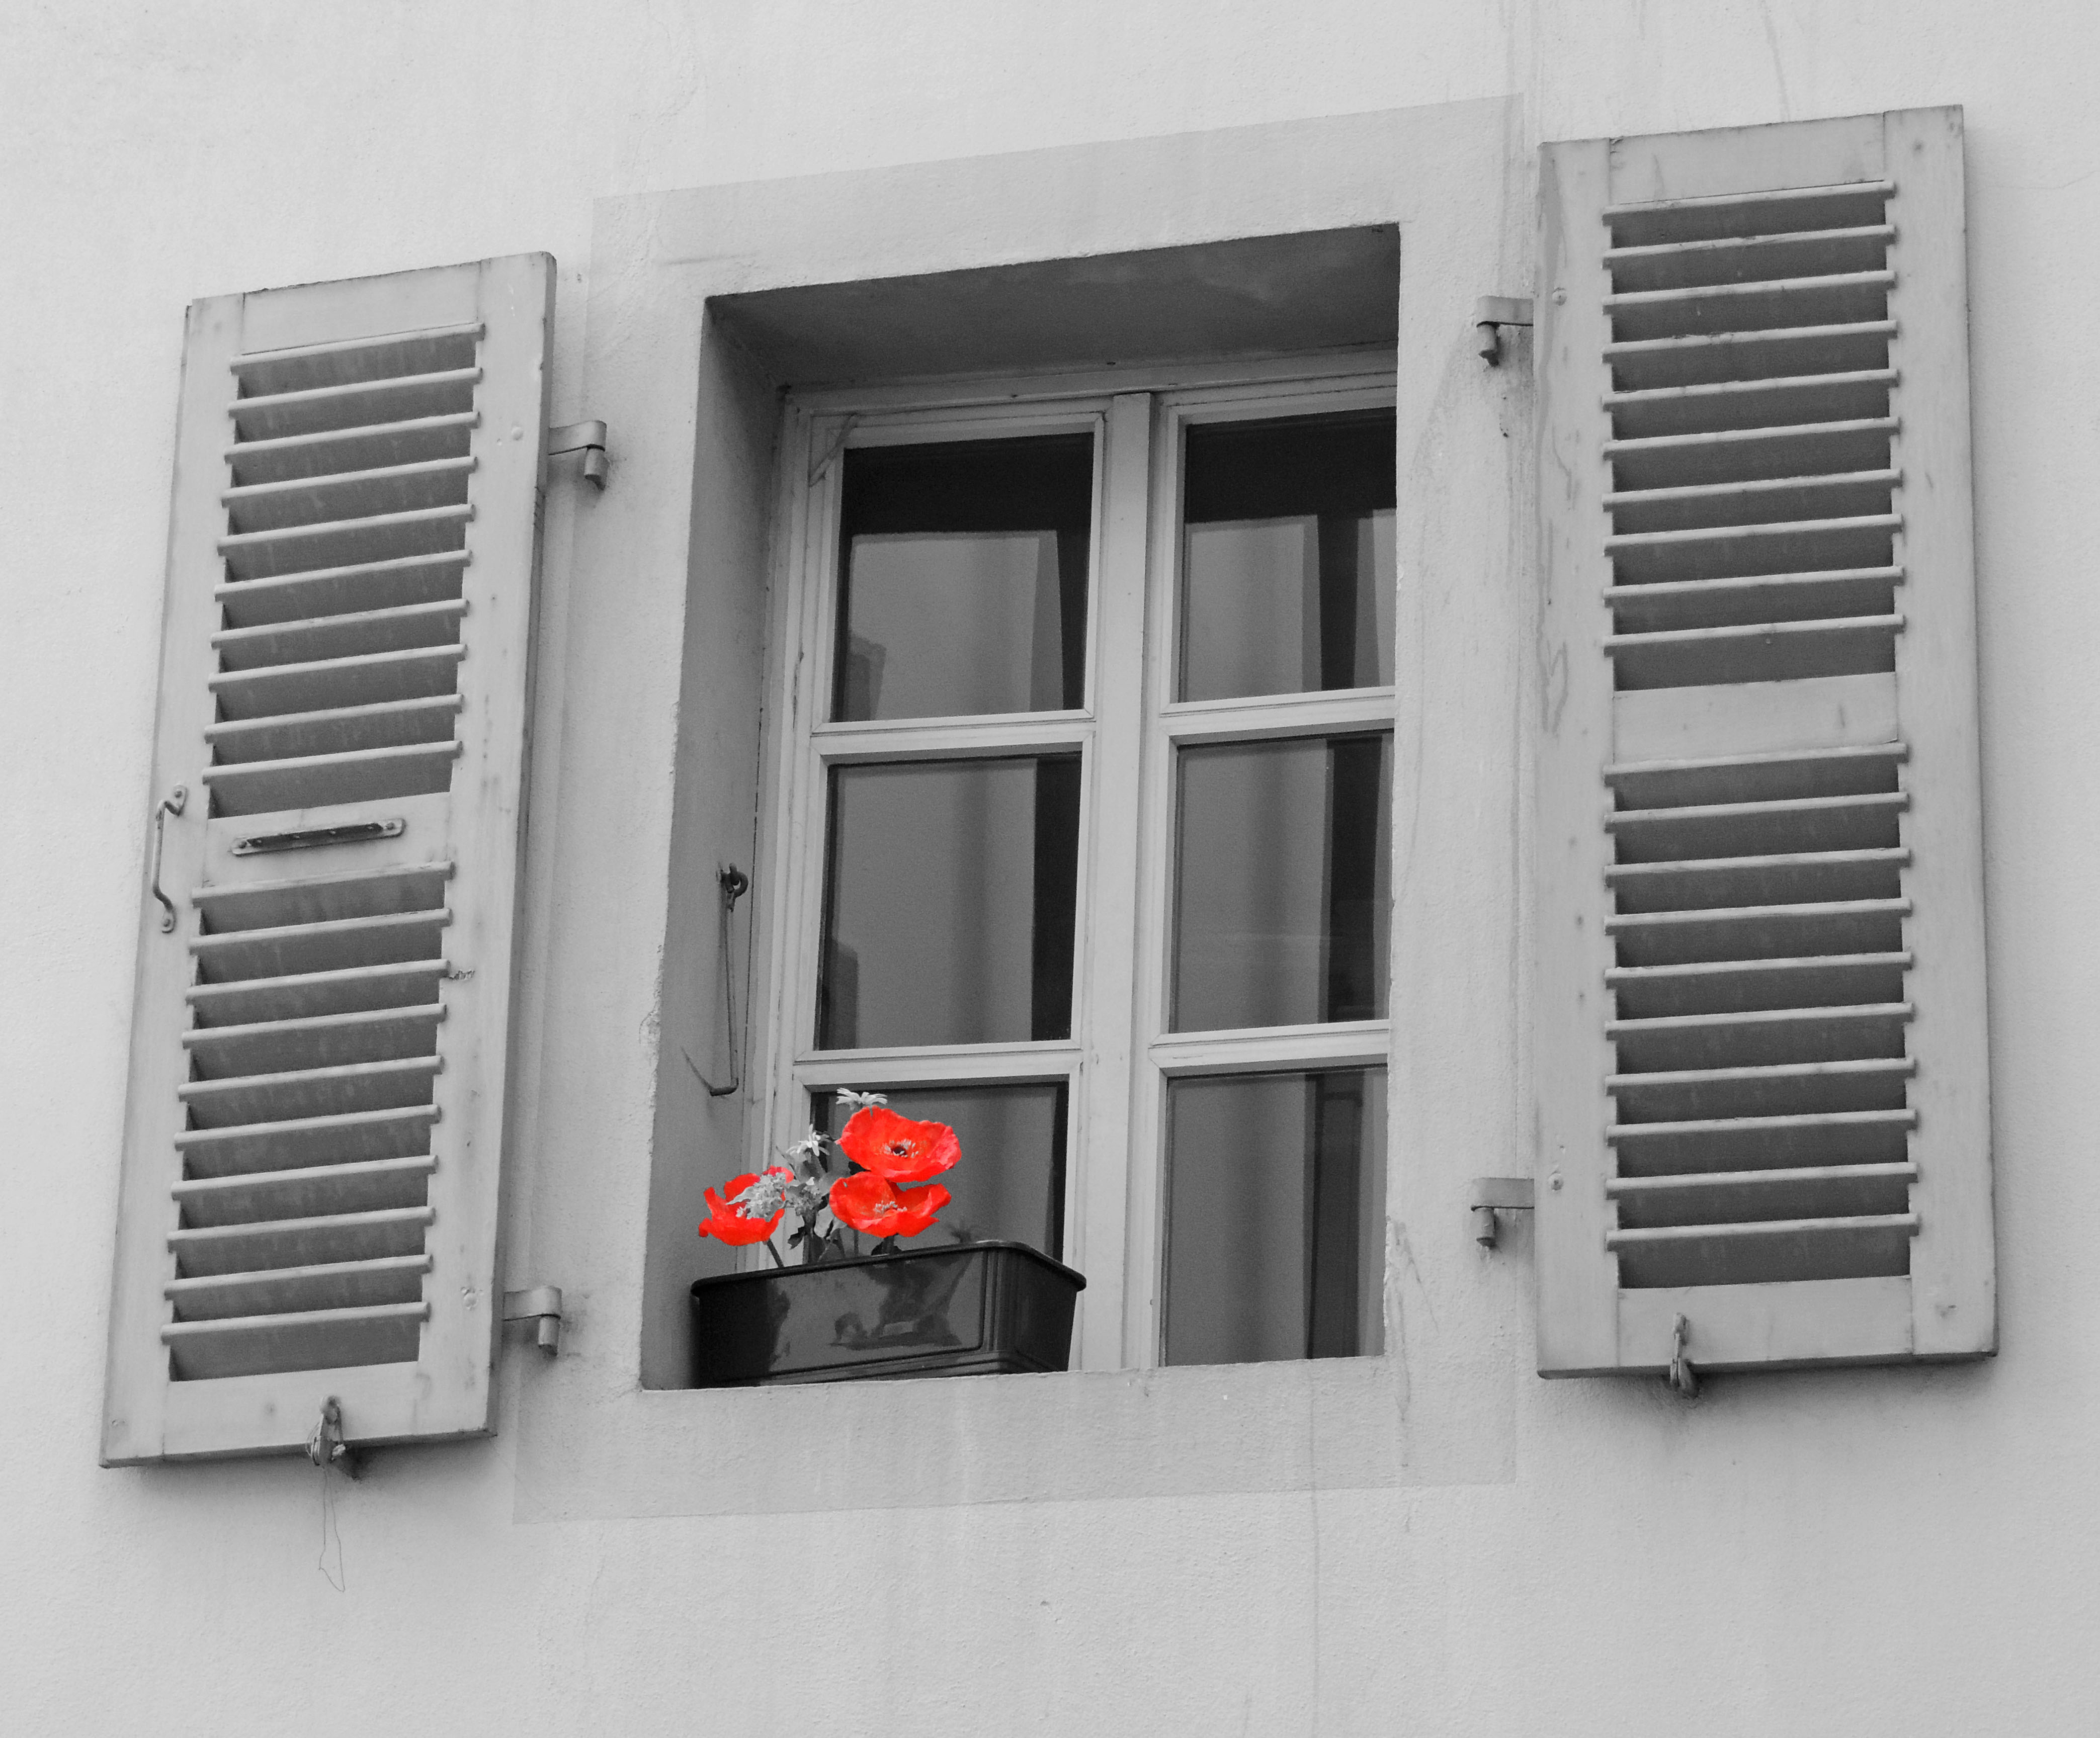 man made, flower, selective color, window